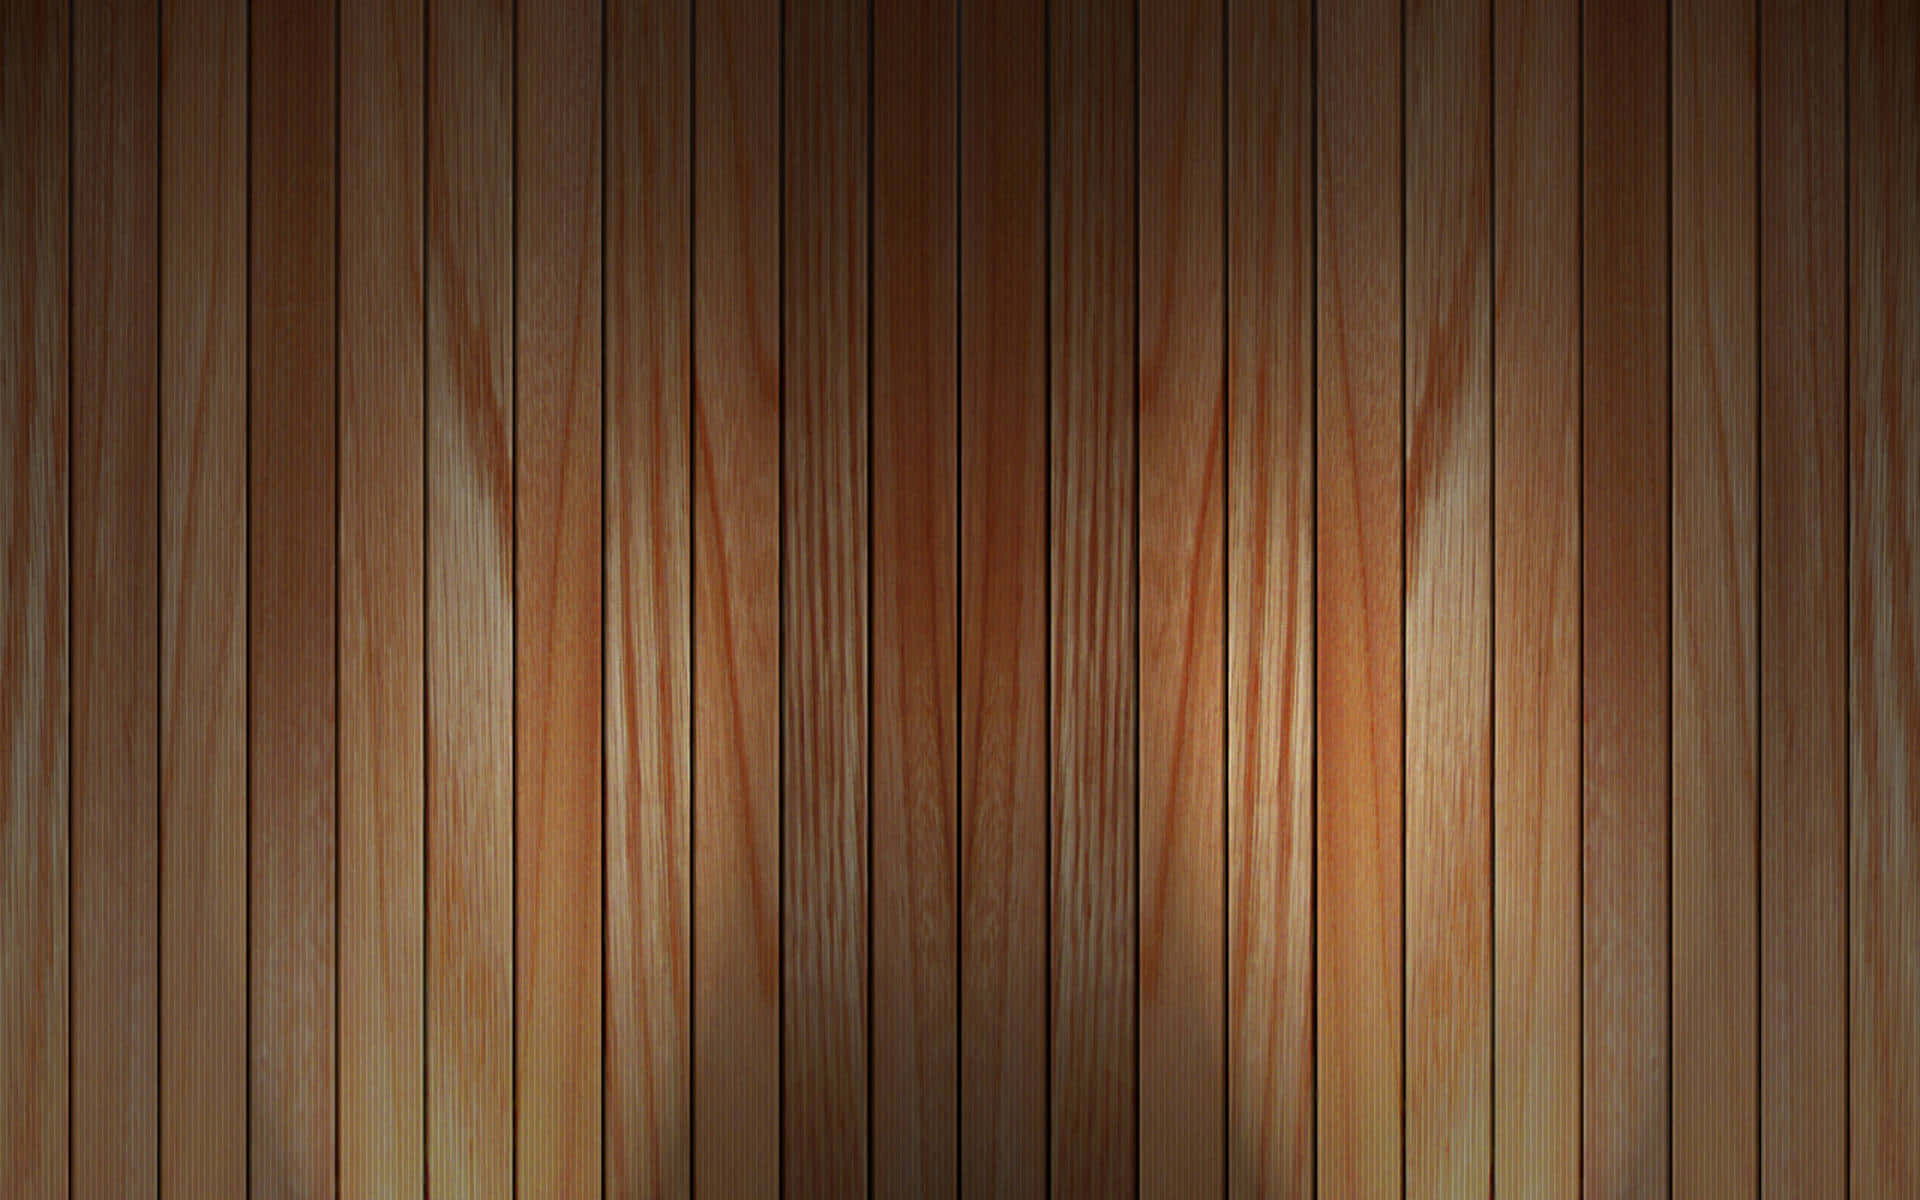 Wood Background Vector | Price 1 Credit Usd $1